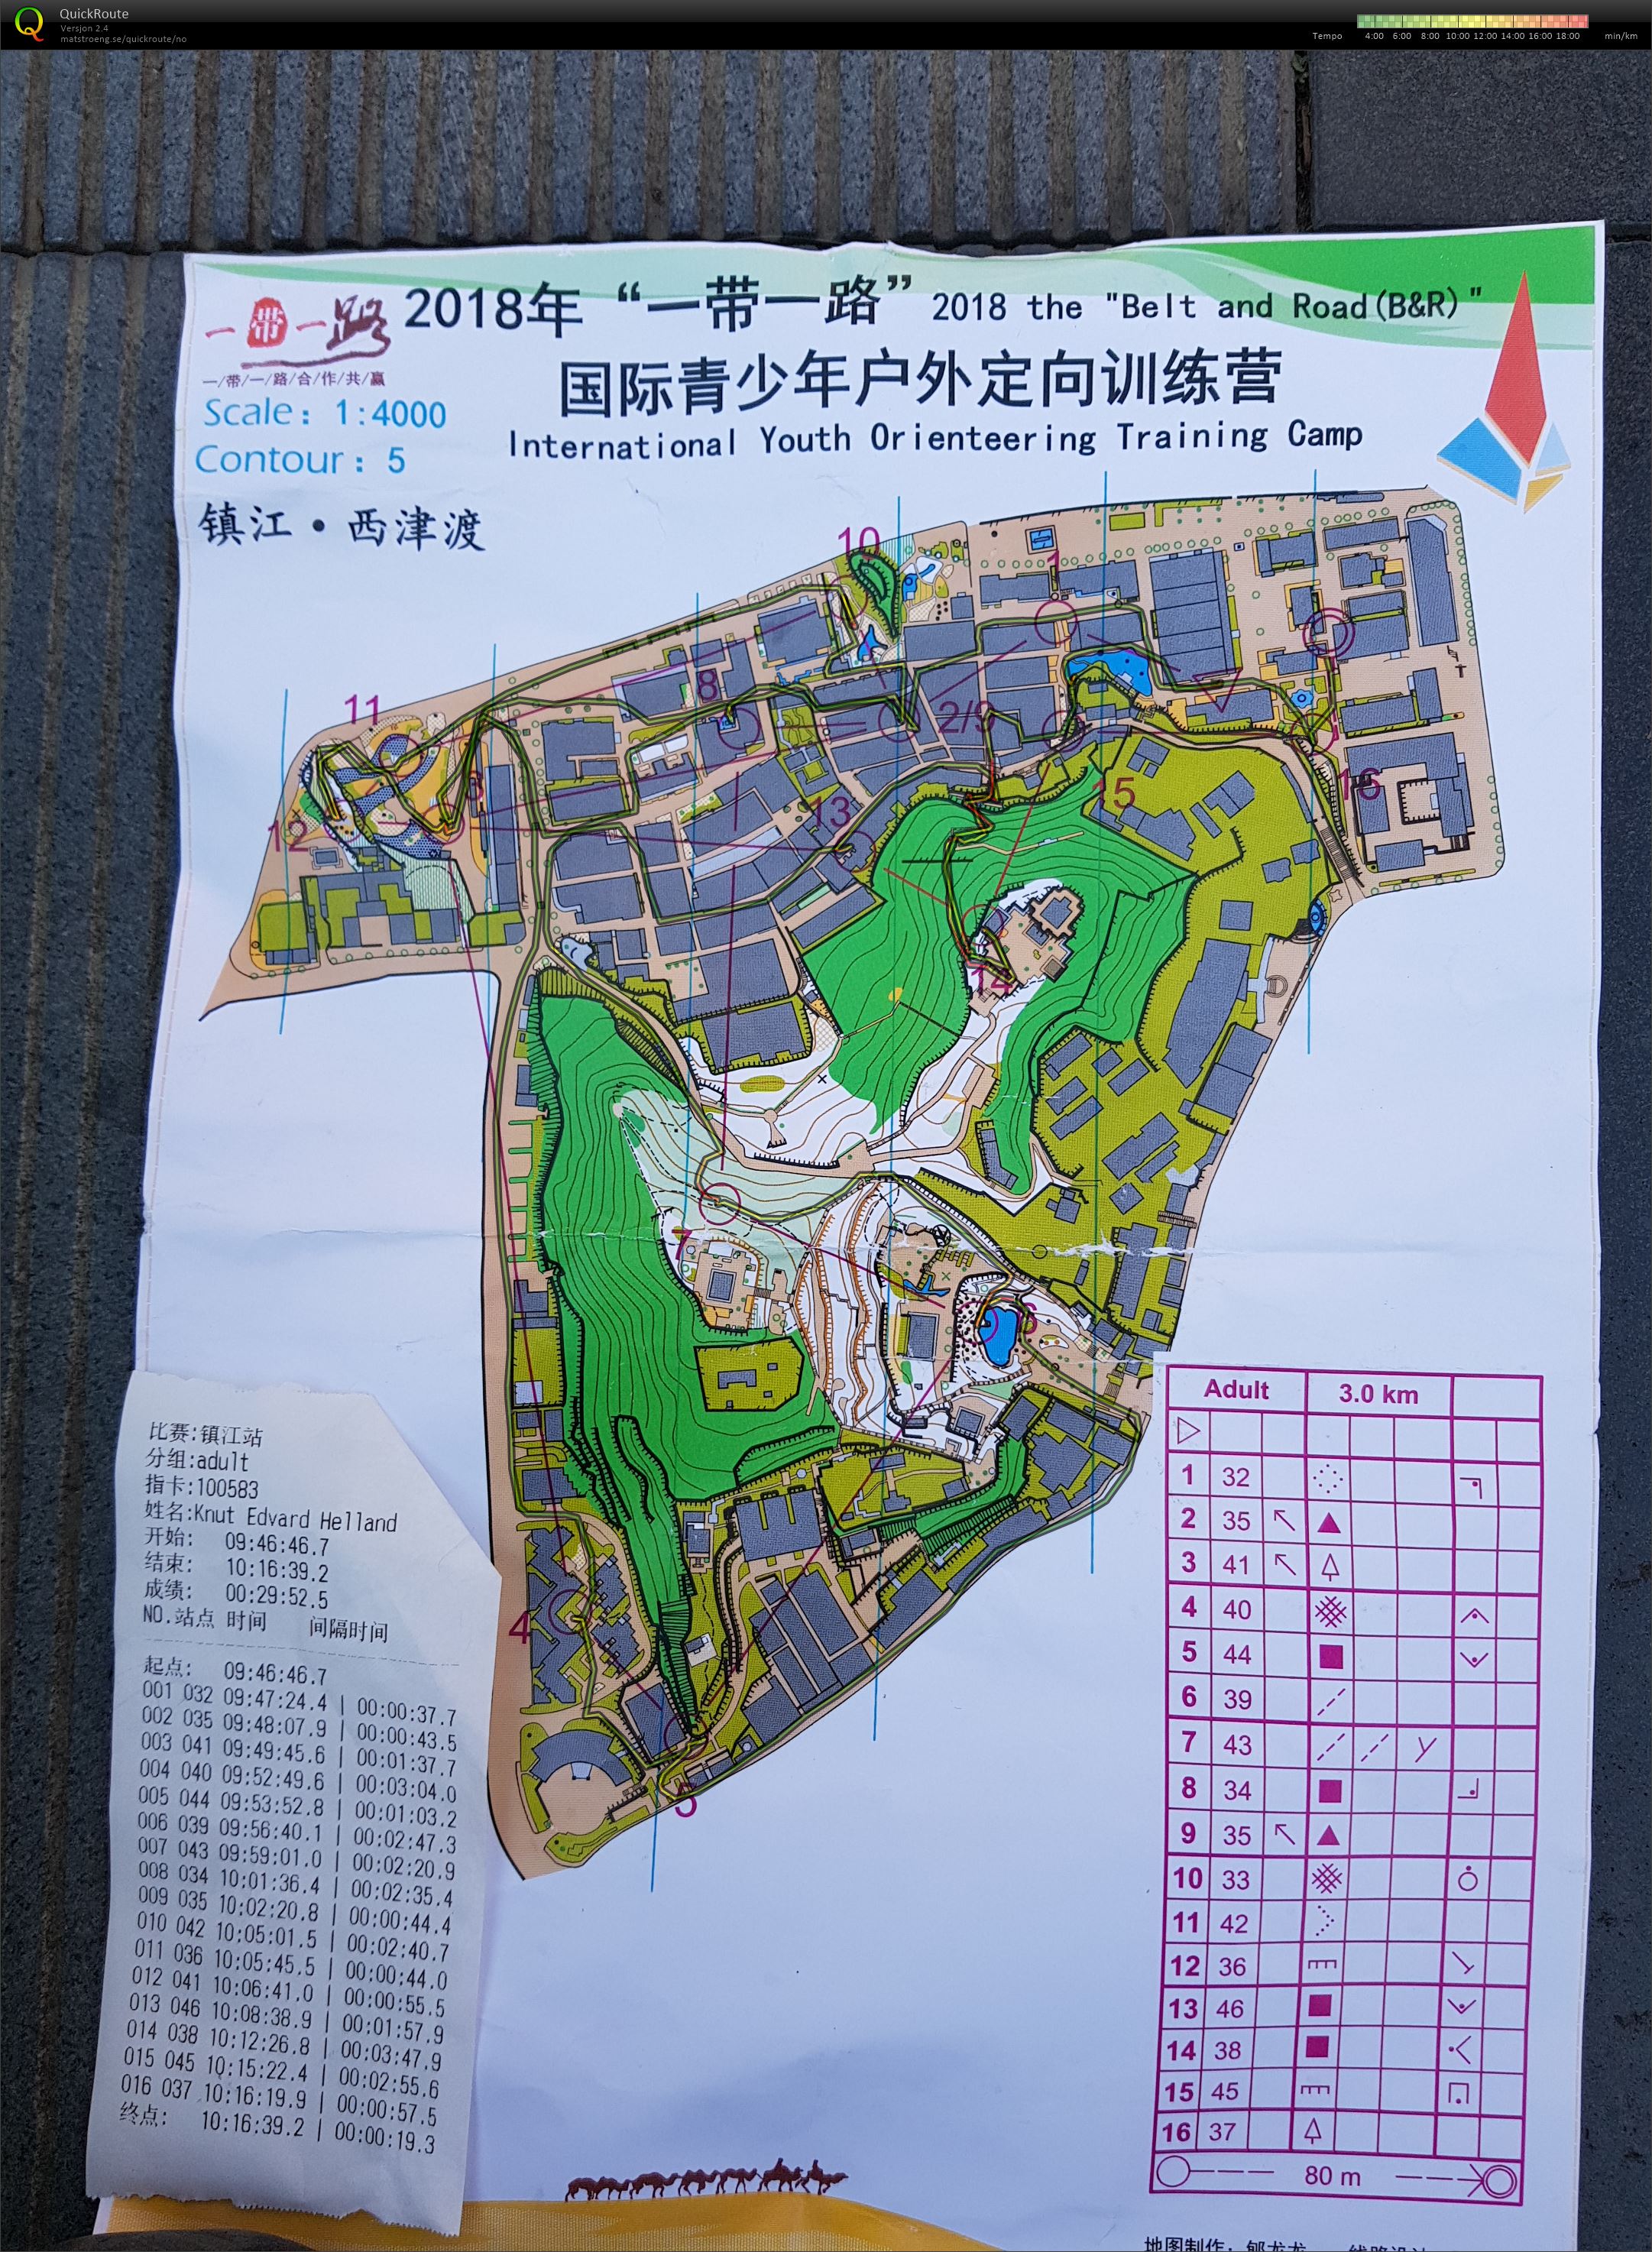 Belt and Road International Youth Orienteering Camp (29-10-2018)